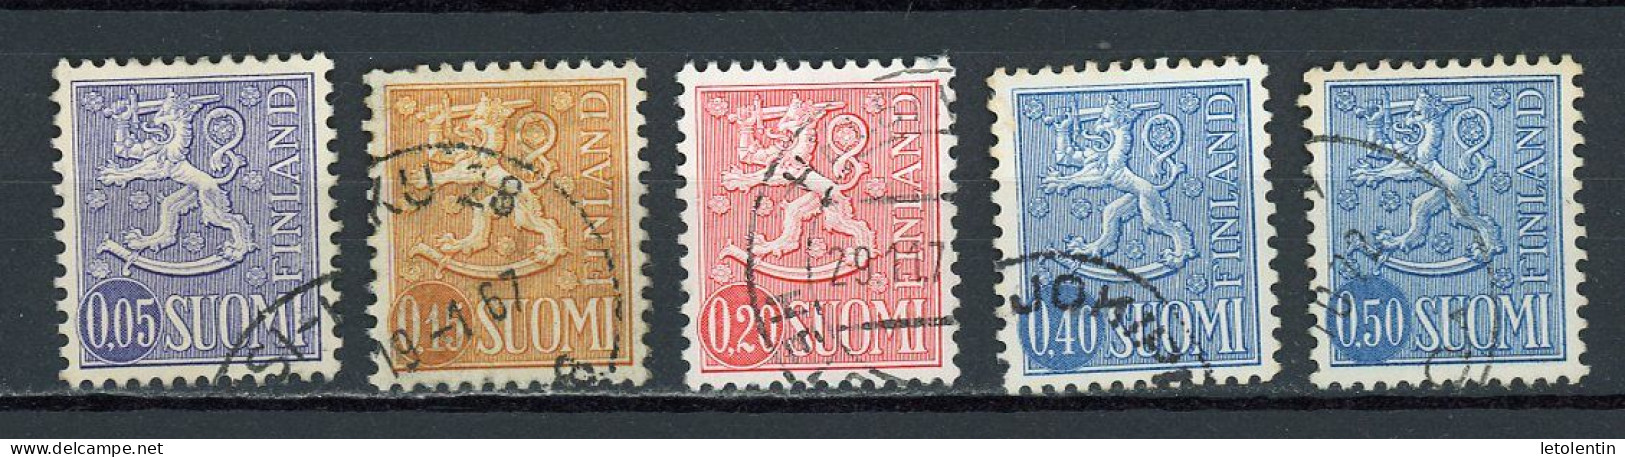 FINLANDE : ARMOIRIES N° Yvert 532(A)+535(A)+536C+540(A) +541AB(A) Obli. - Used Stamps